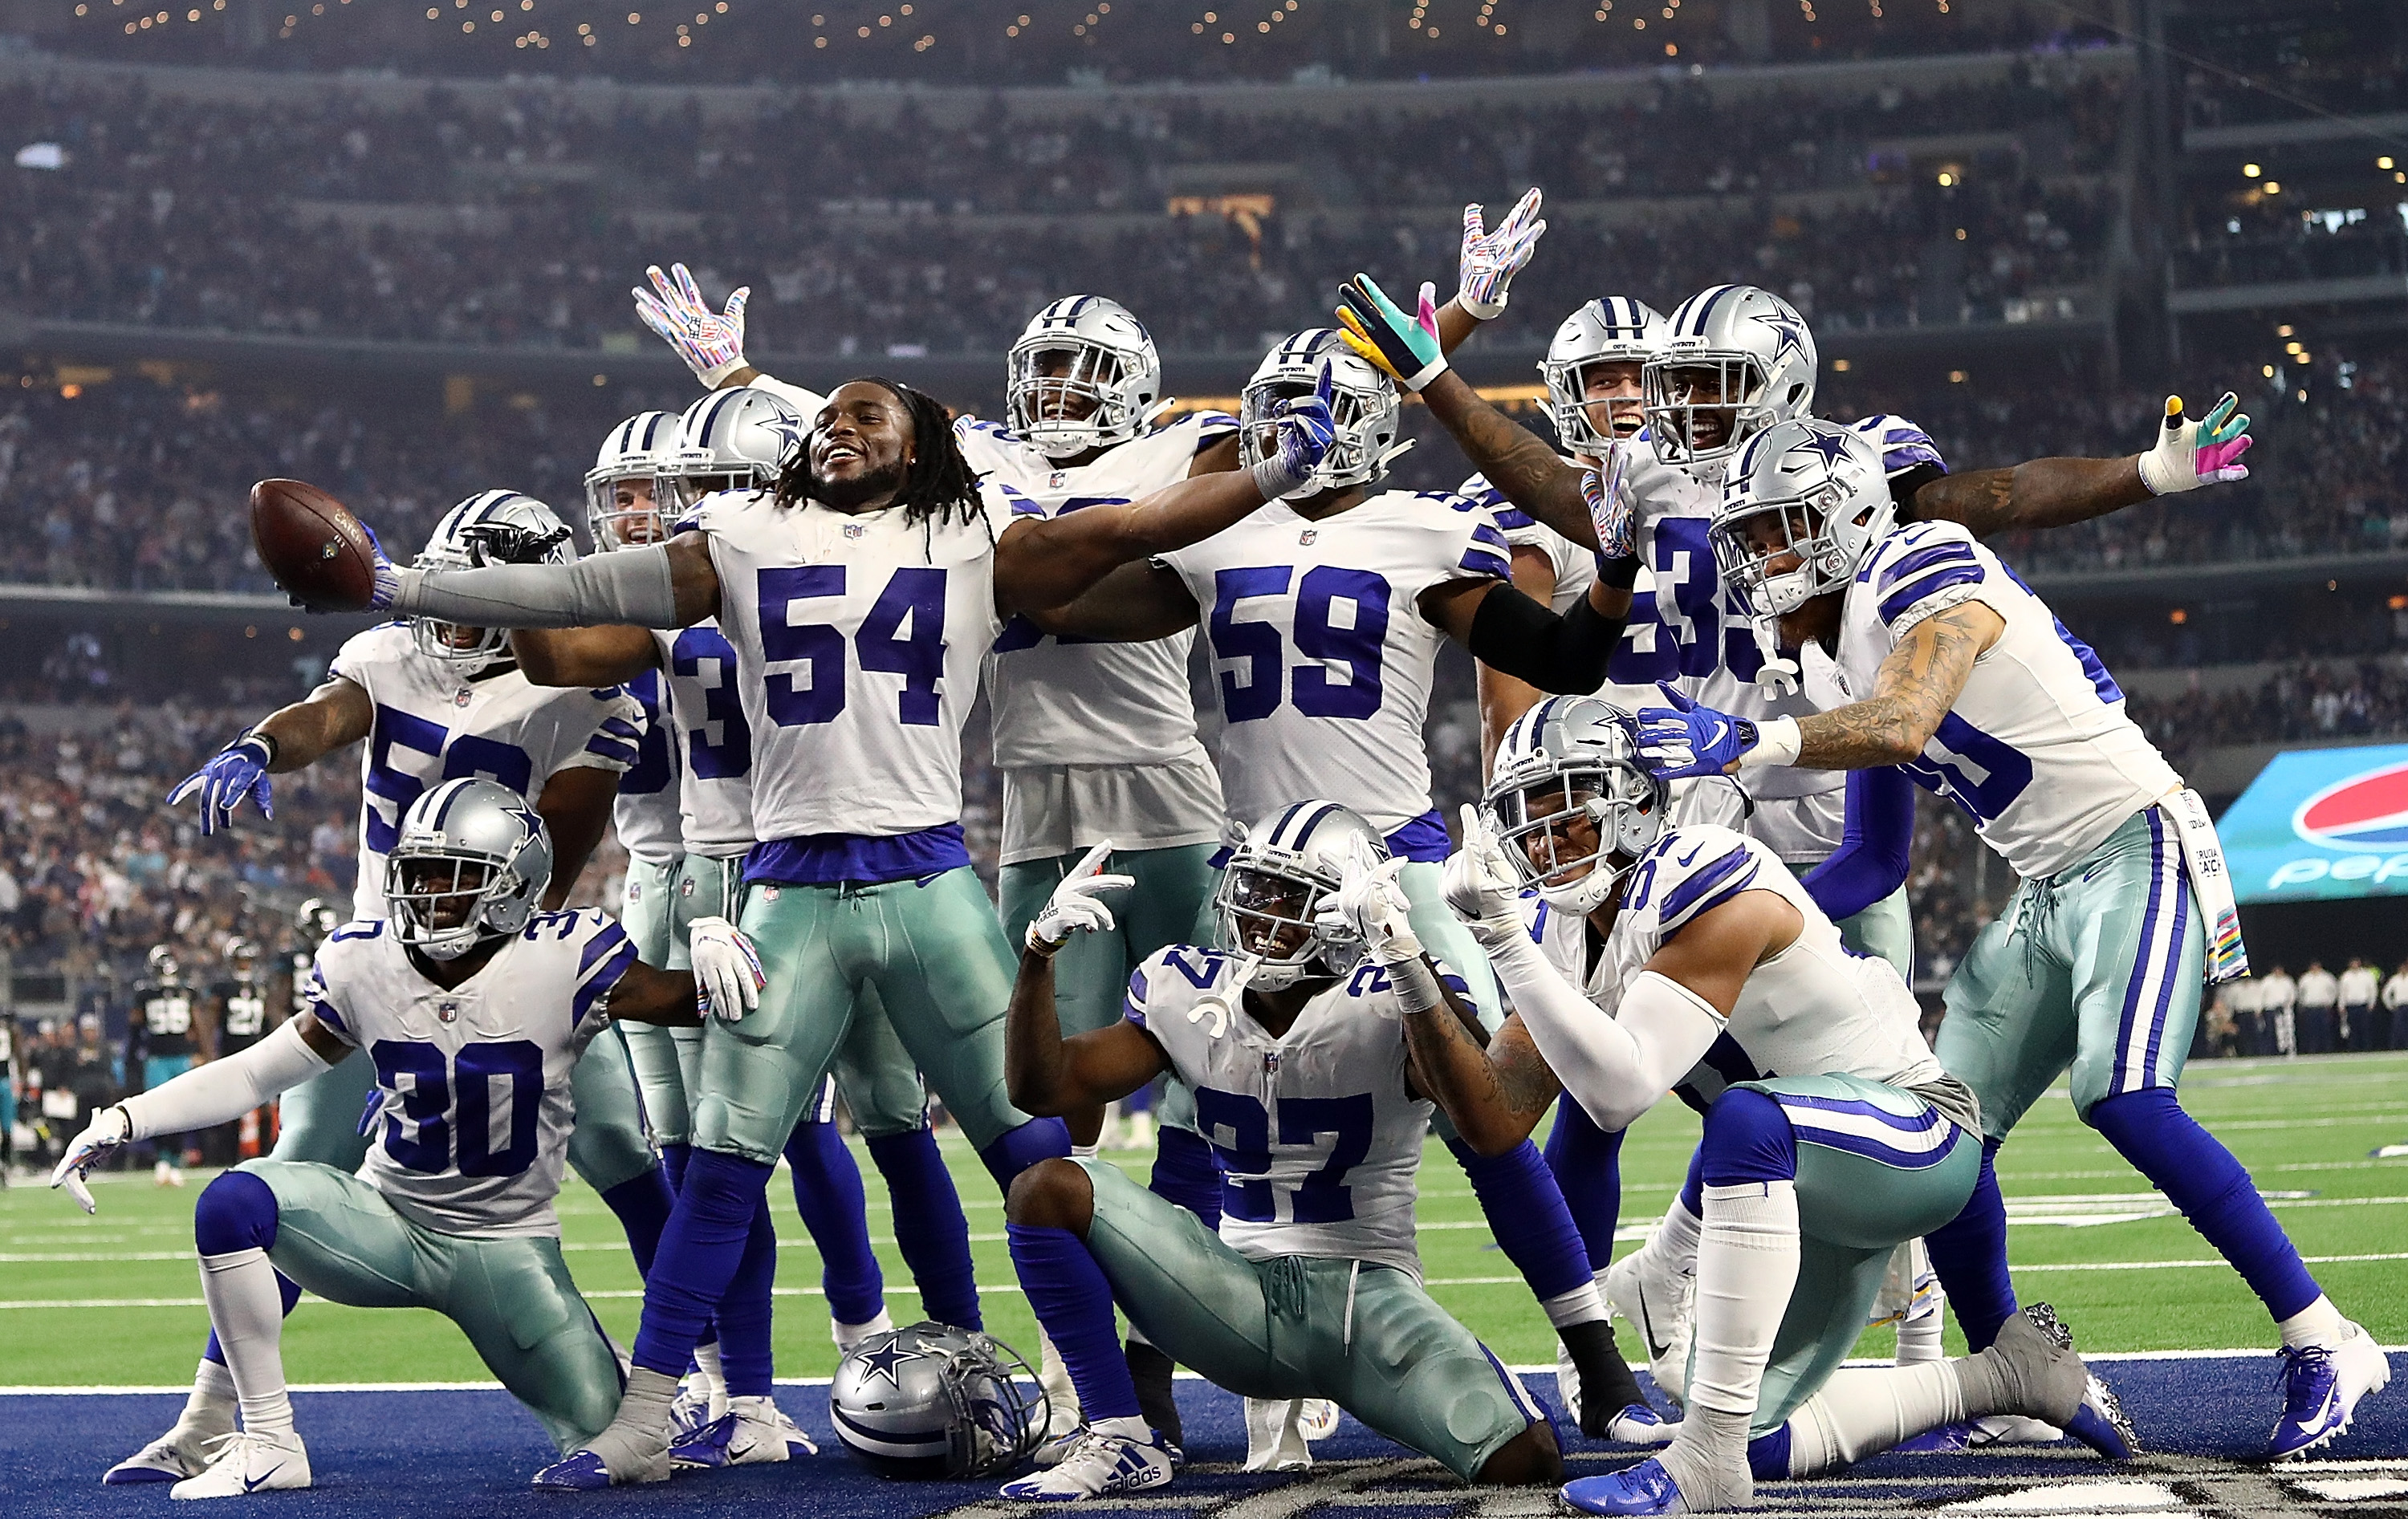 dallas cowboys game how to watch